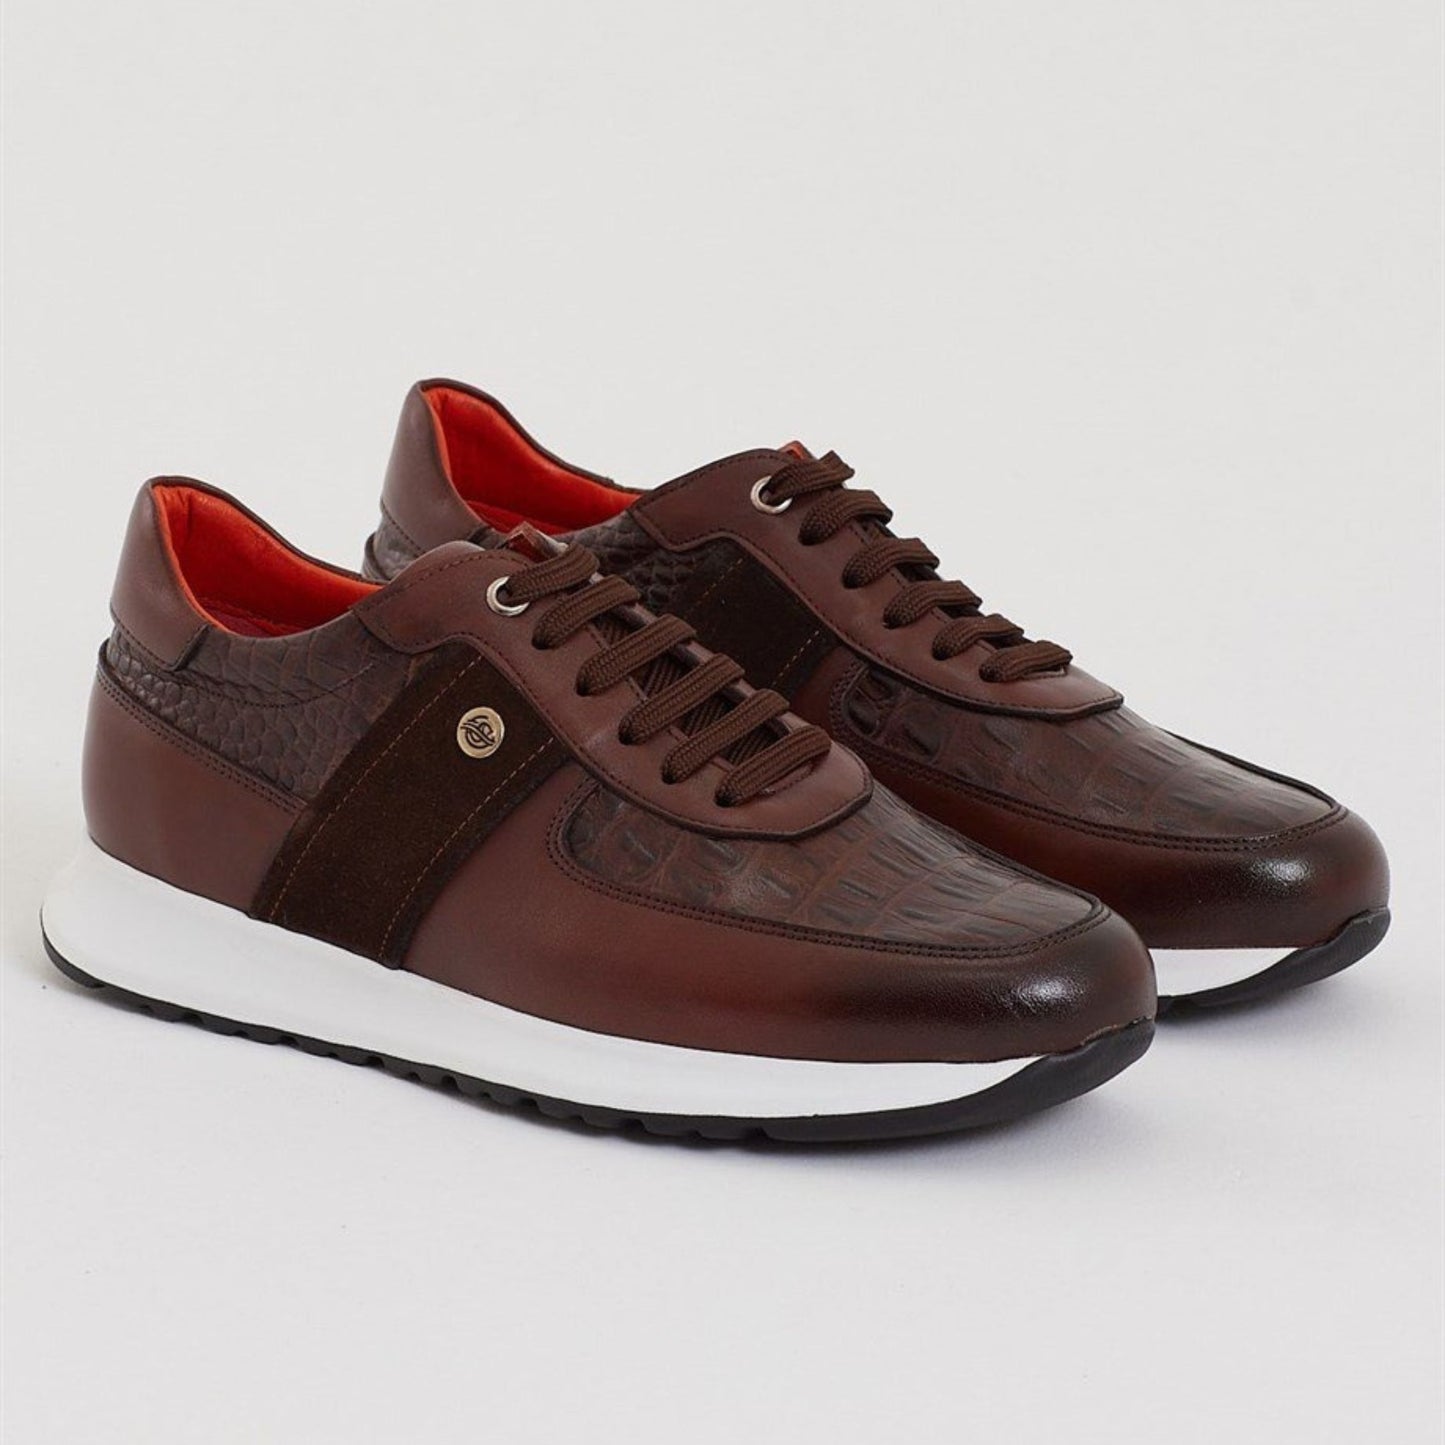 Madasat Brown Casual Shoes - 616 |